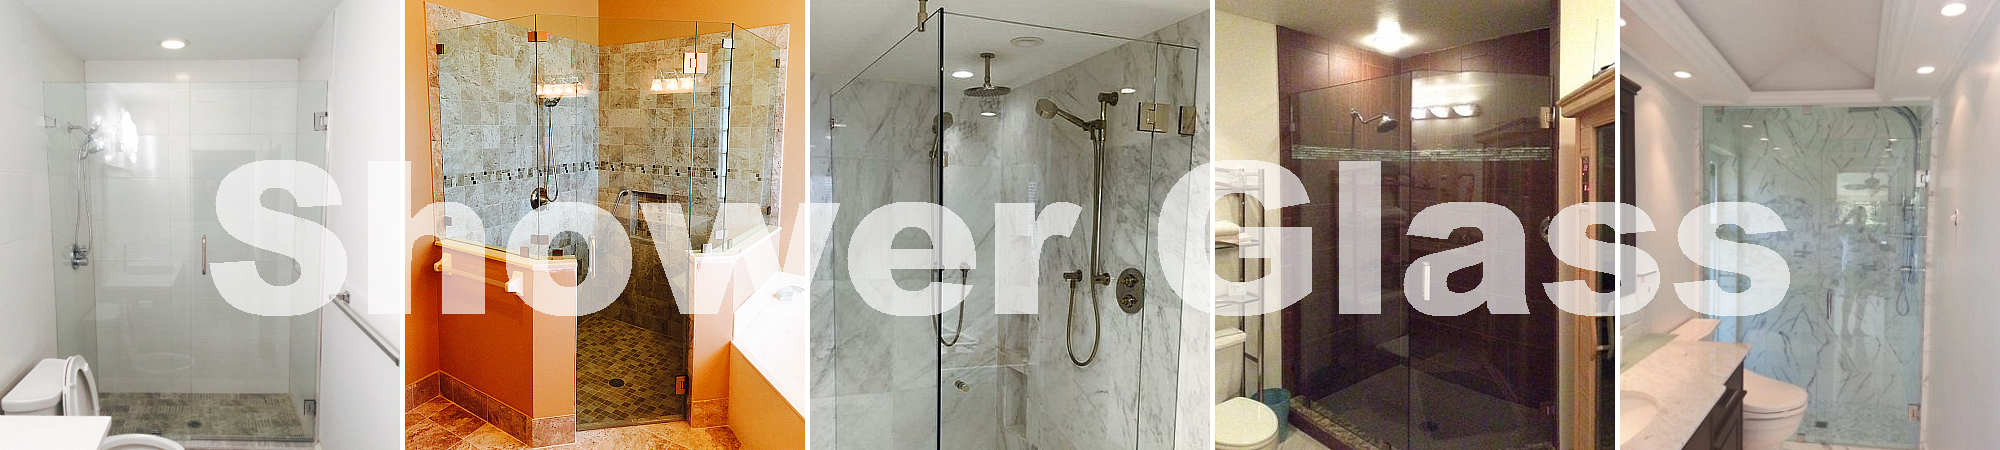 Shower Glass & Shower Enclosures - Installation & Replacement